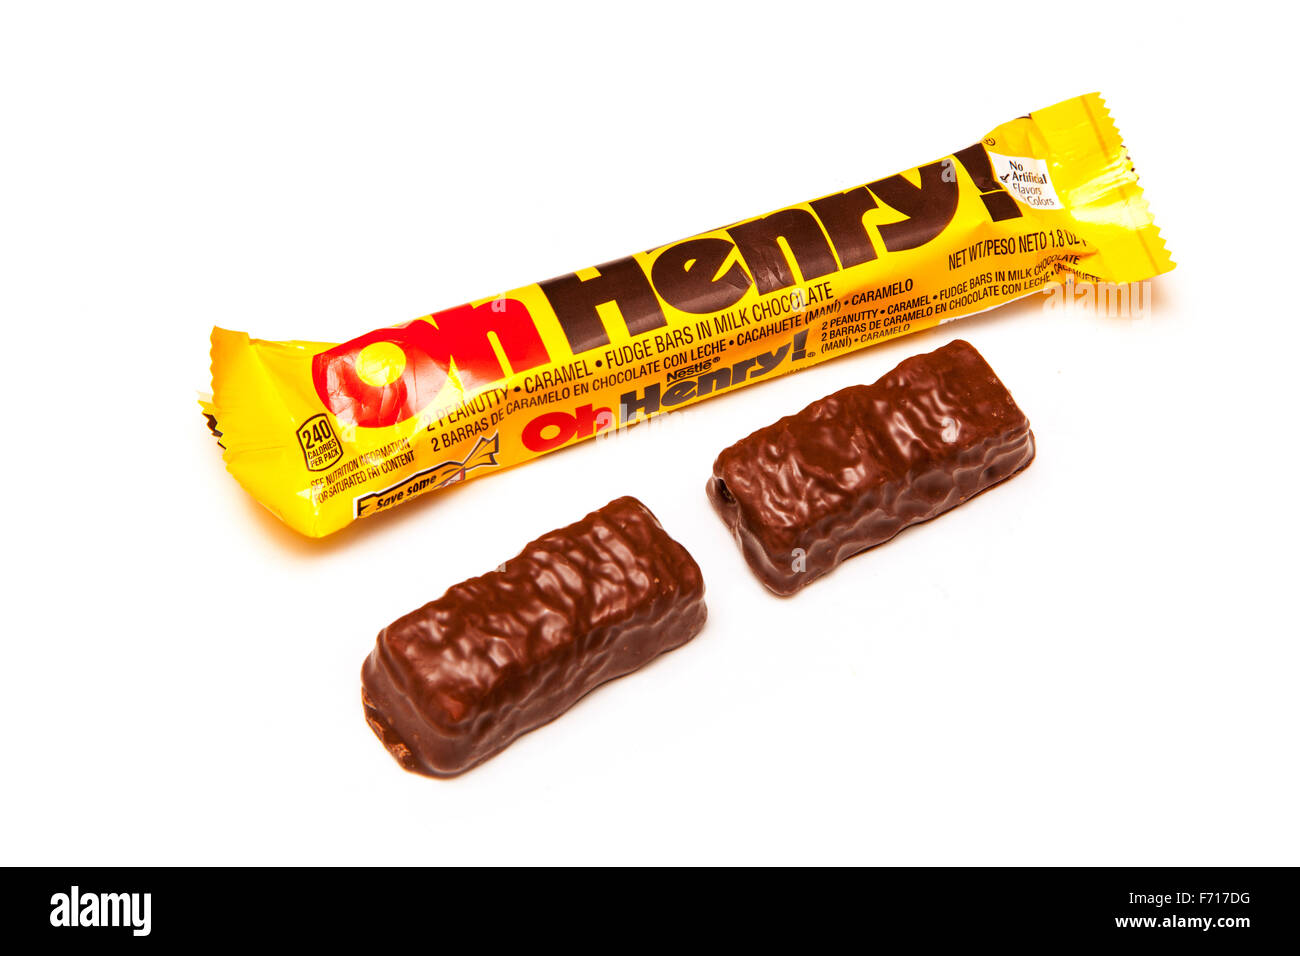 Oh Henry! a chocolate candy bar containing peanuts, caramel, and fudge coated in chocolate. Isolated on a white background. Stock Photo